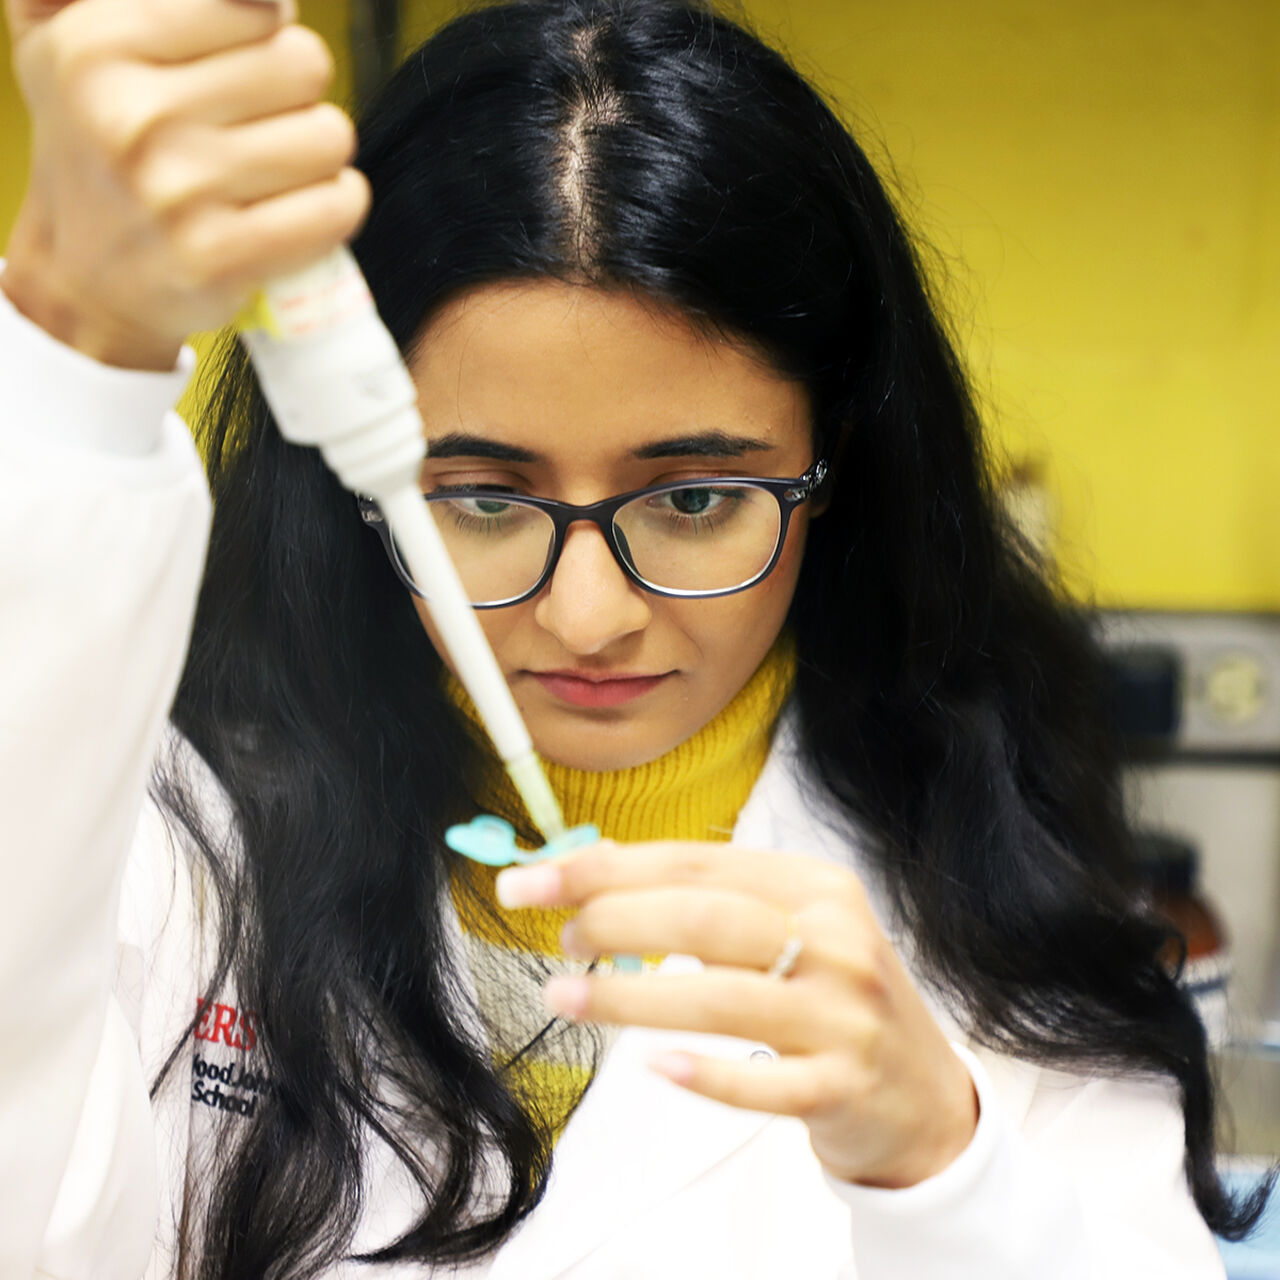 Douglass student researcher working with a pipette image number 0